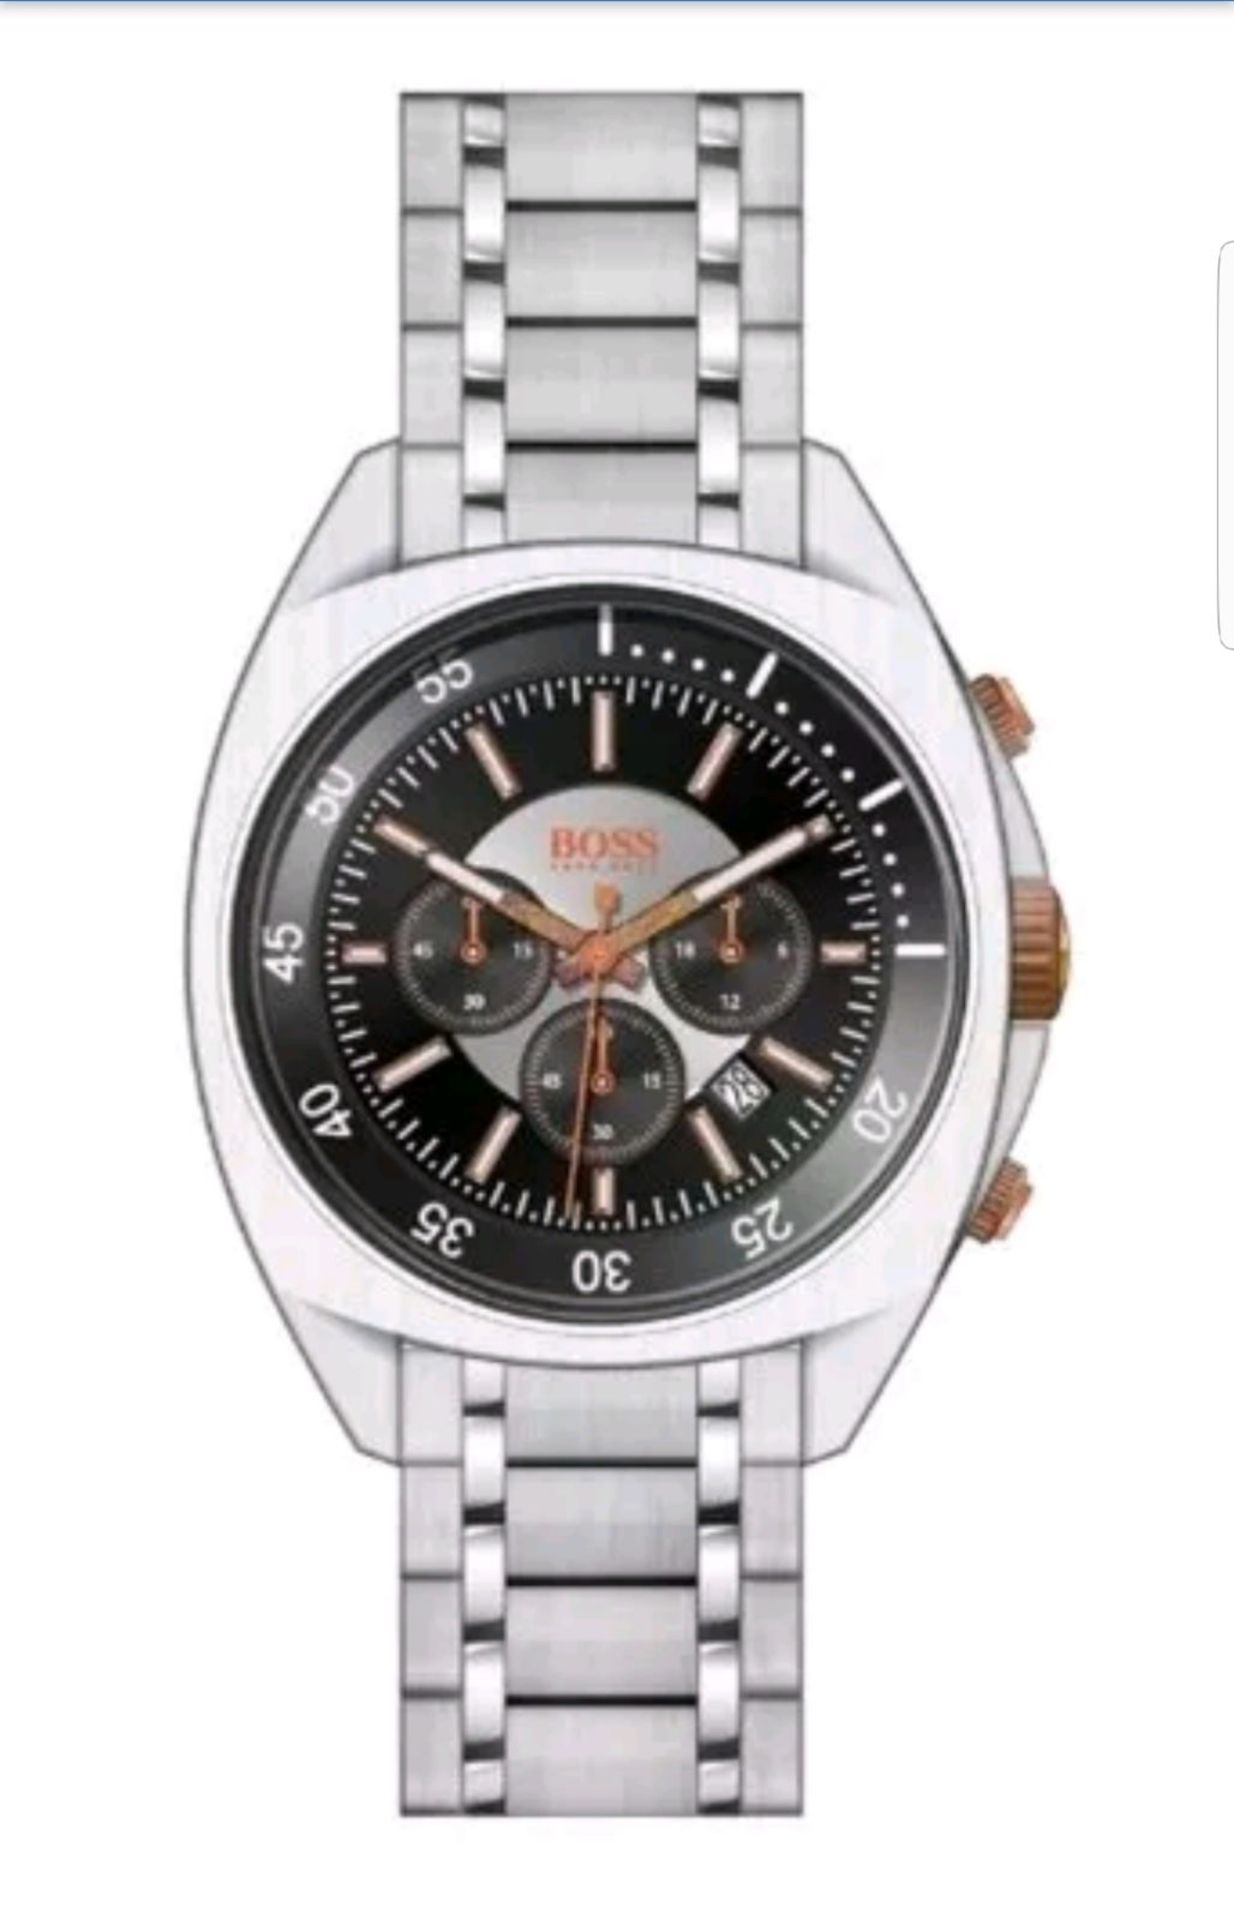 BRAND NEW GENTS HUGO BOSS WATCH 1512298, COMPLETE WITH ORIGINAL PACKAGING AND MANUAL - FREE P & P